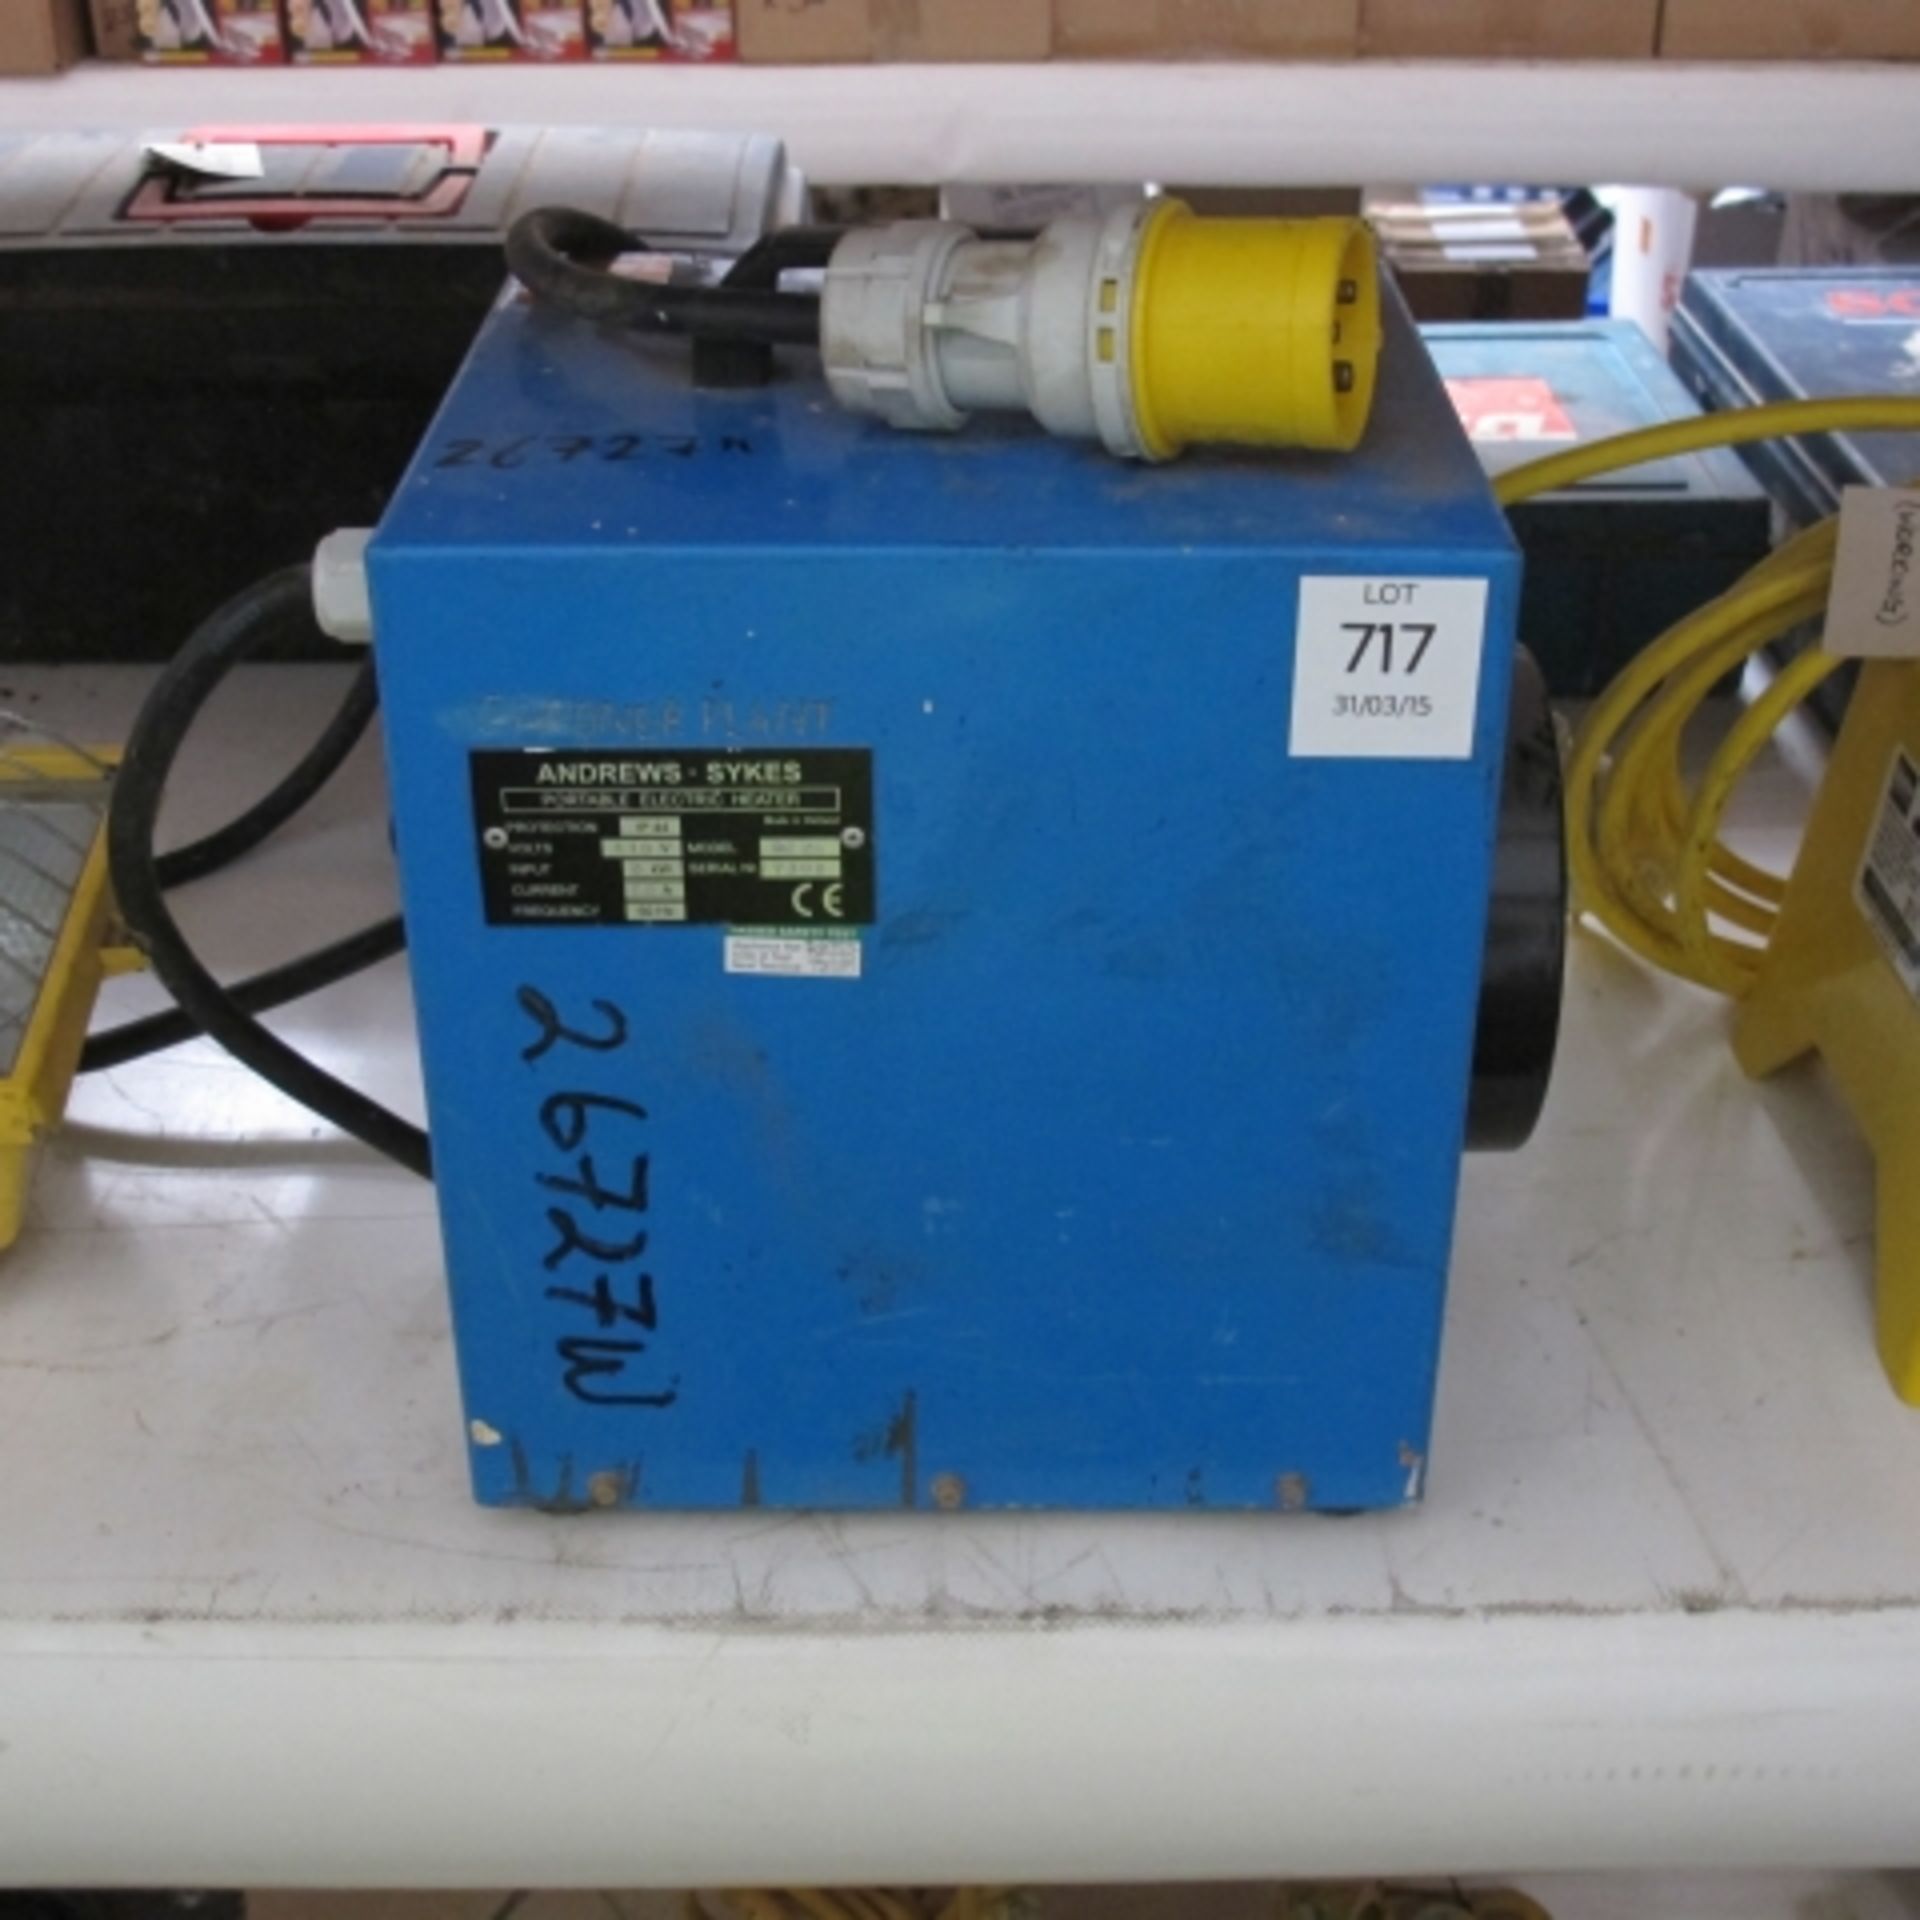 * An Andrew Sykes Portable Electric Heater.  110V.